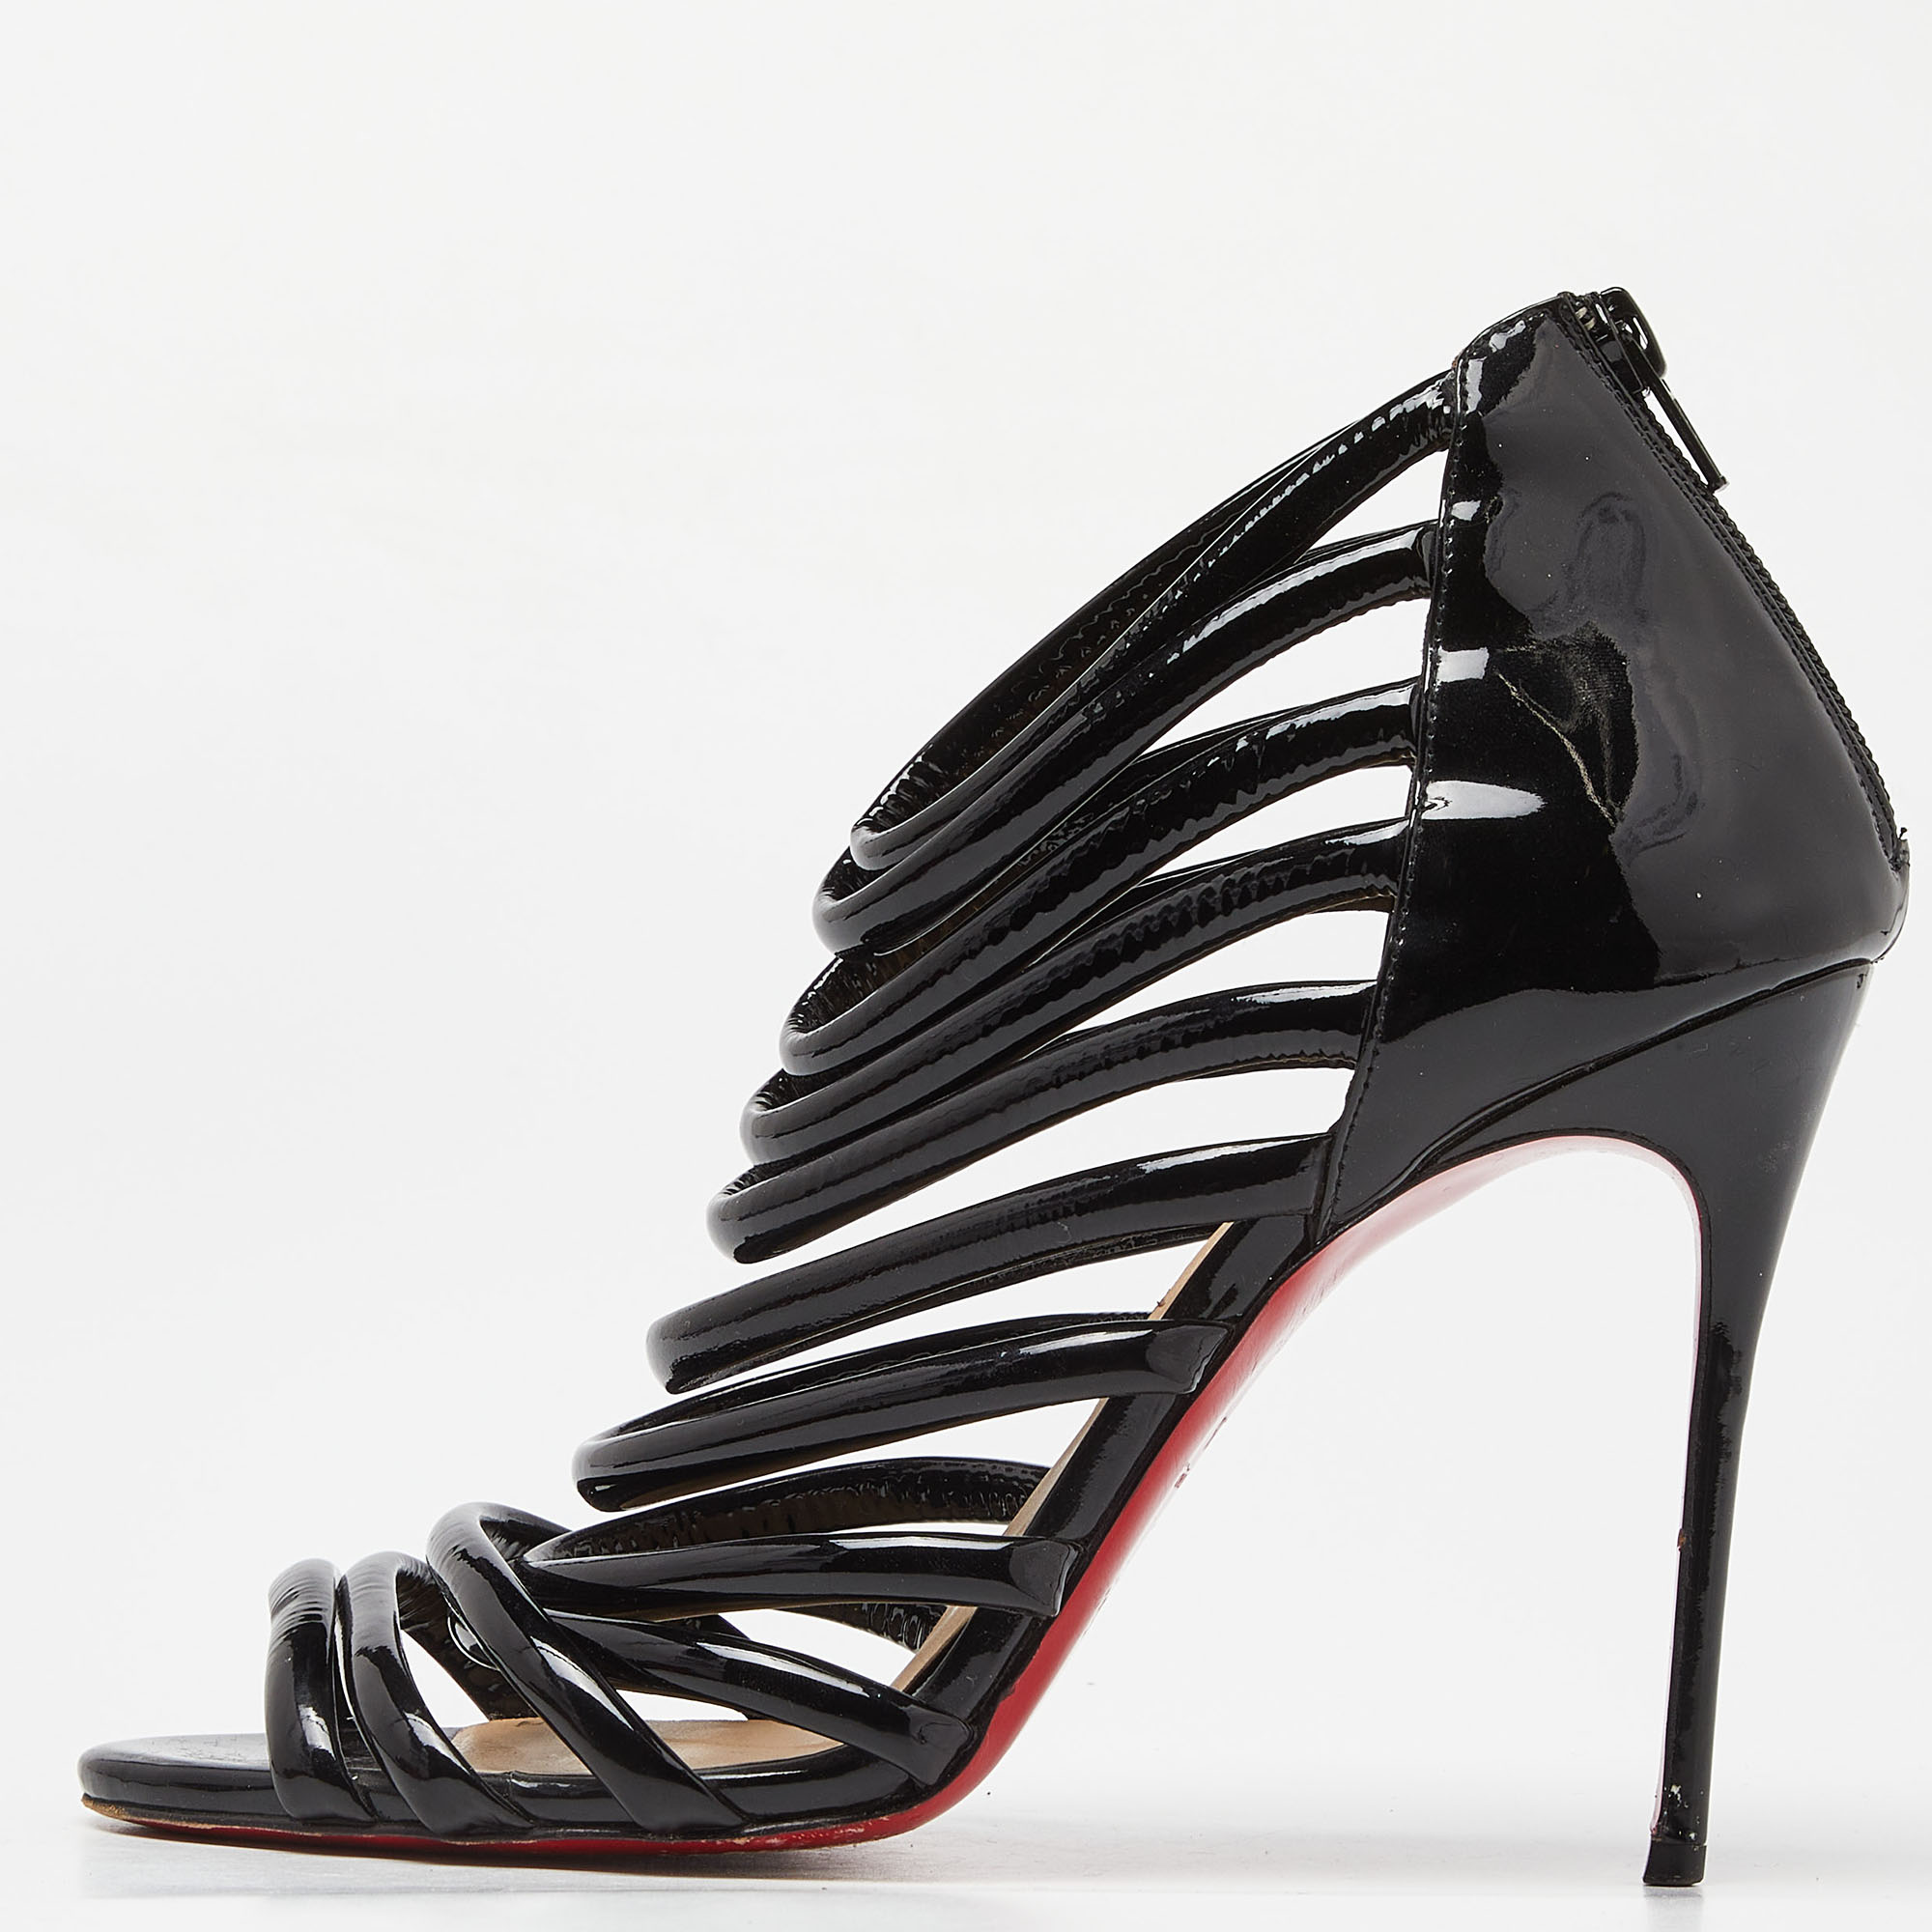 Christian louboutin black patent leather strappy open toe pumps size 39.5